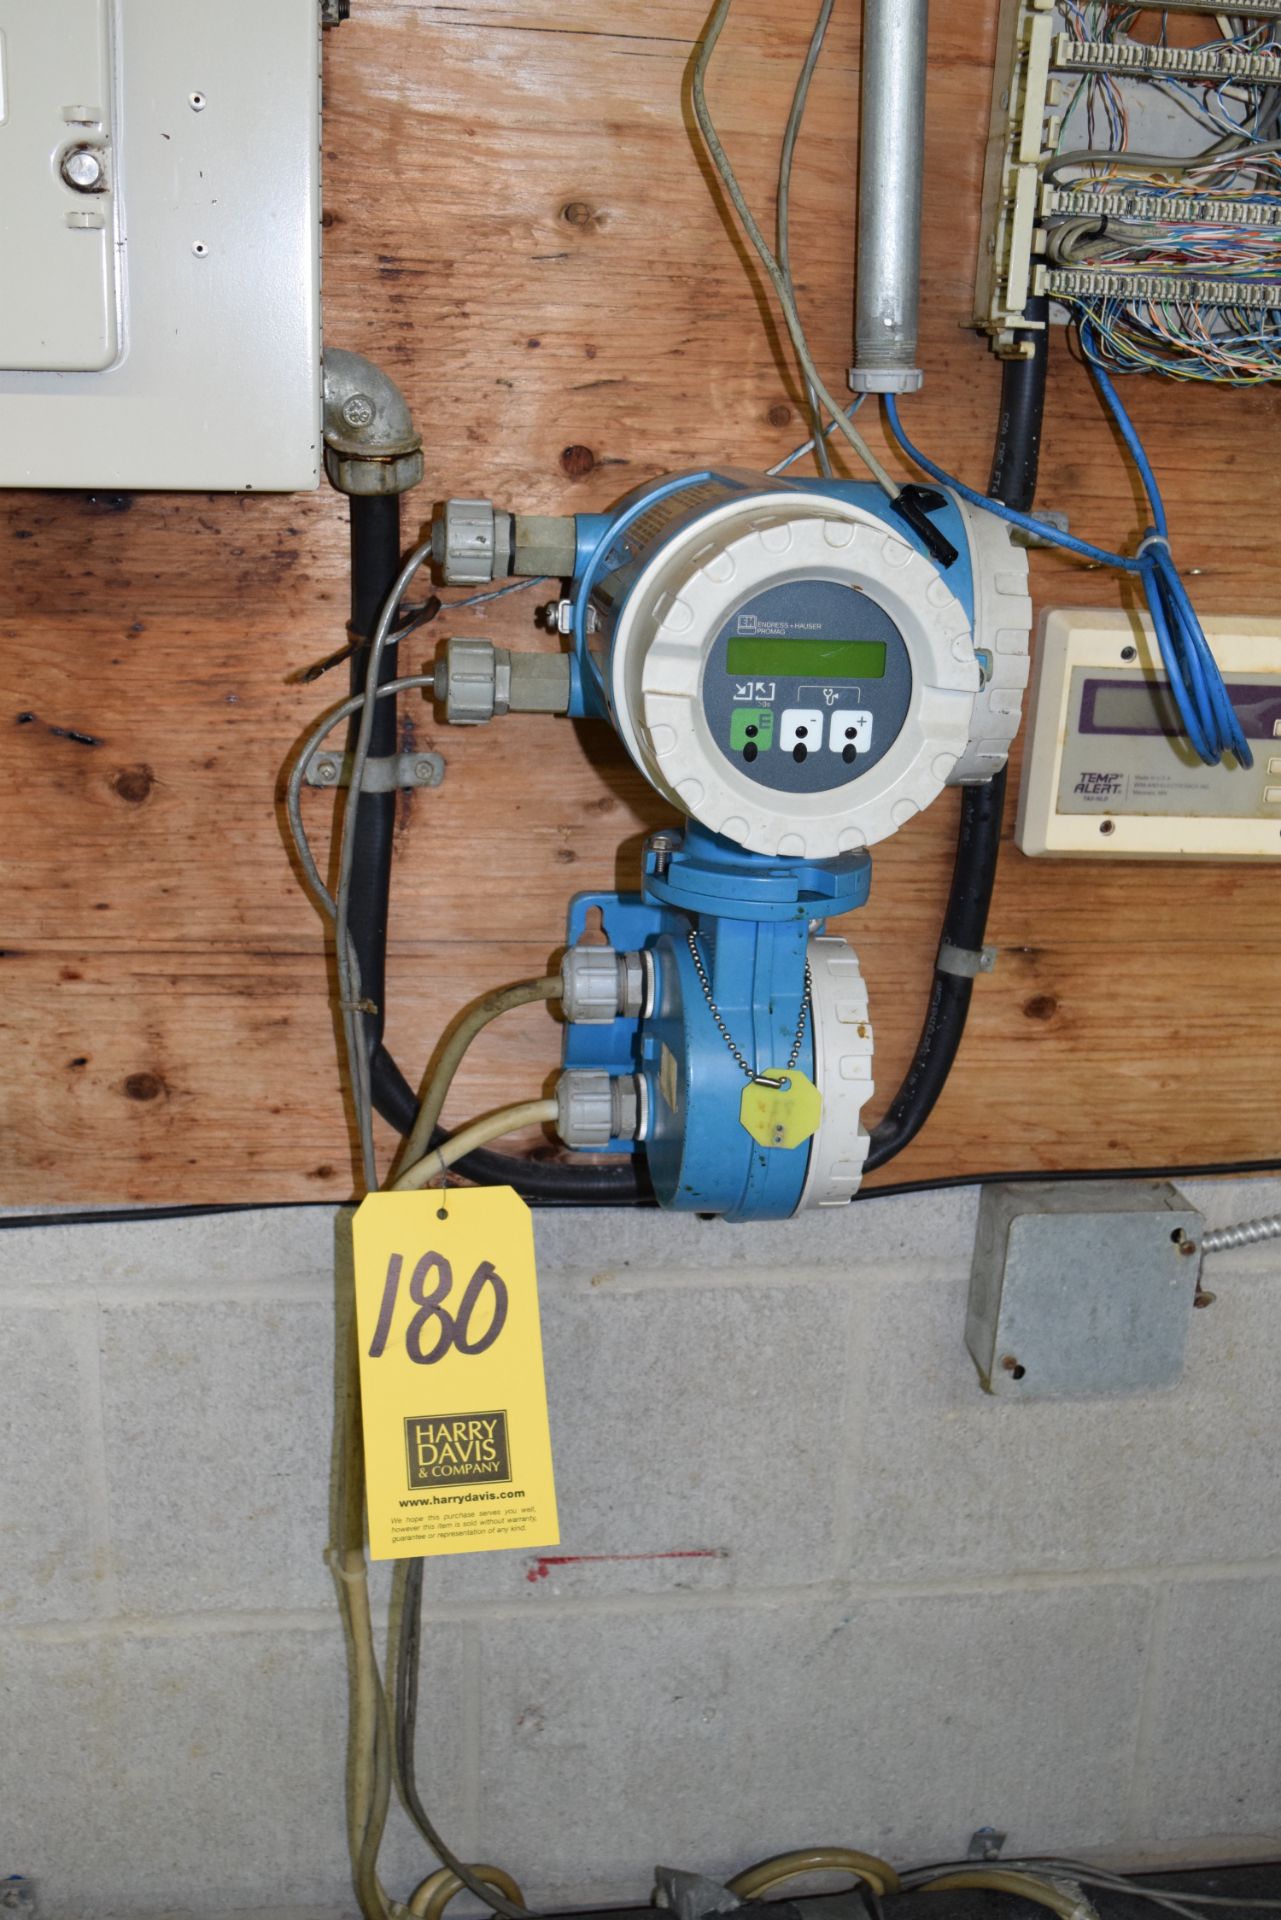 Endress Hauser Pro Mag 33 H Flow Meter Rigging Charge:110 Skidding Charge:25